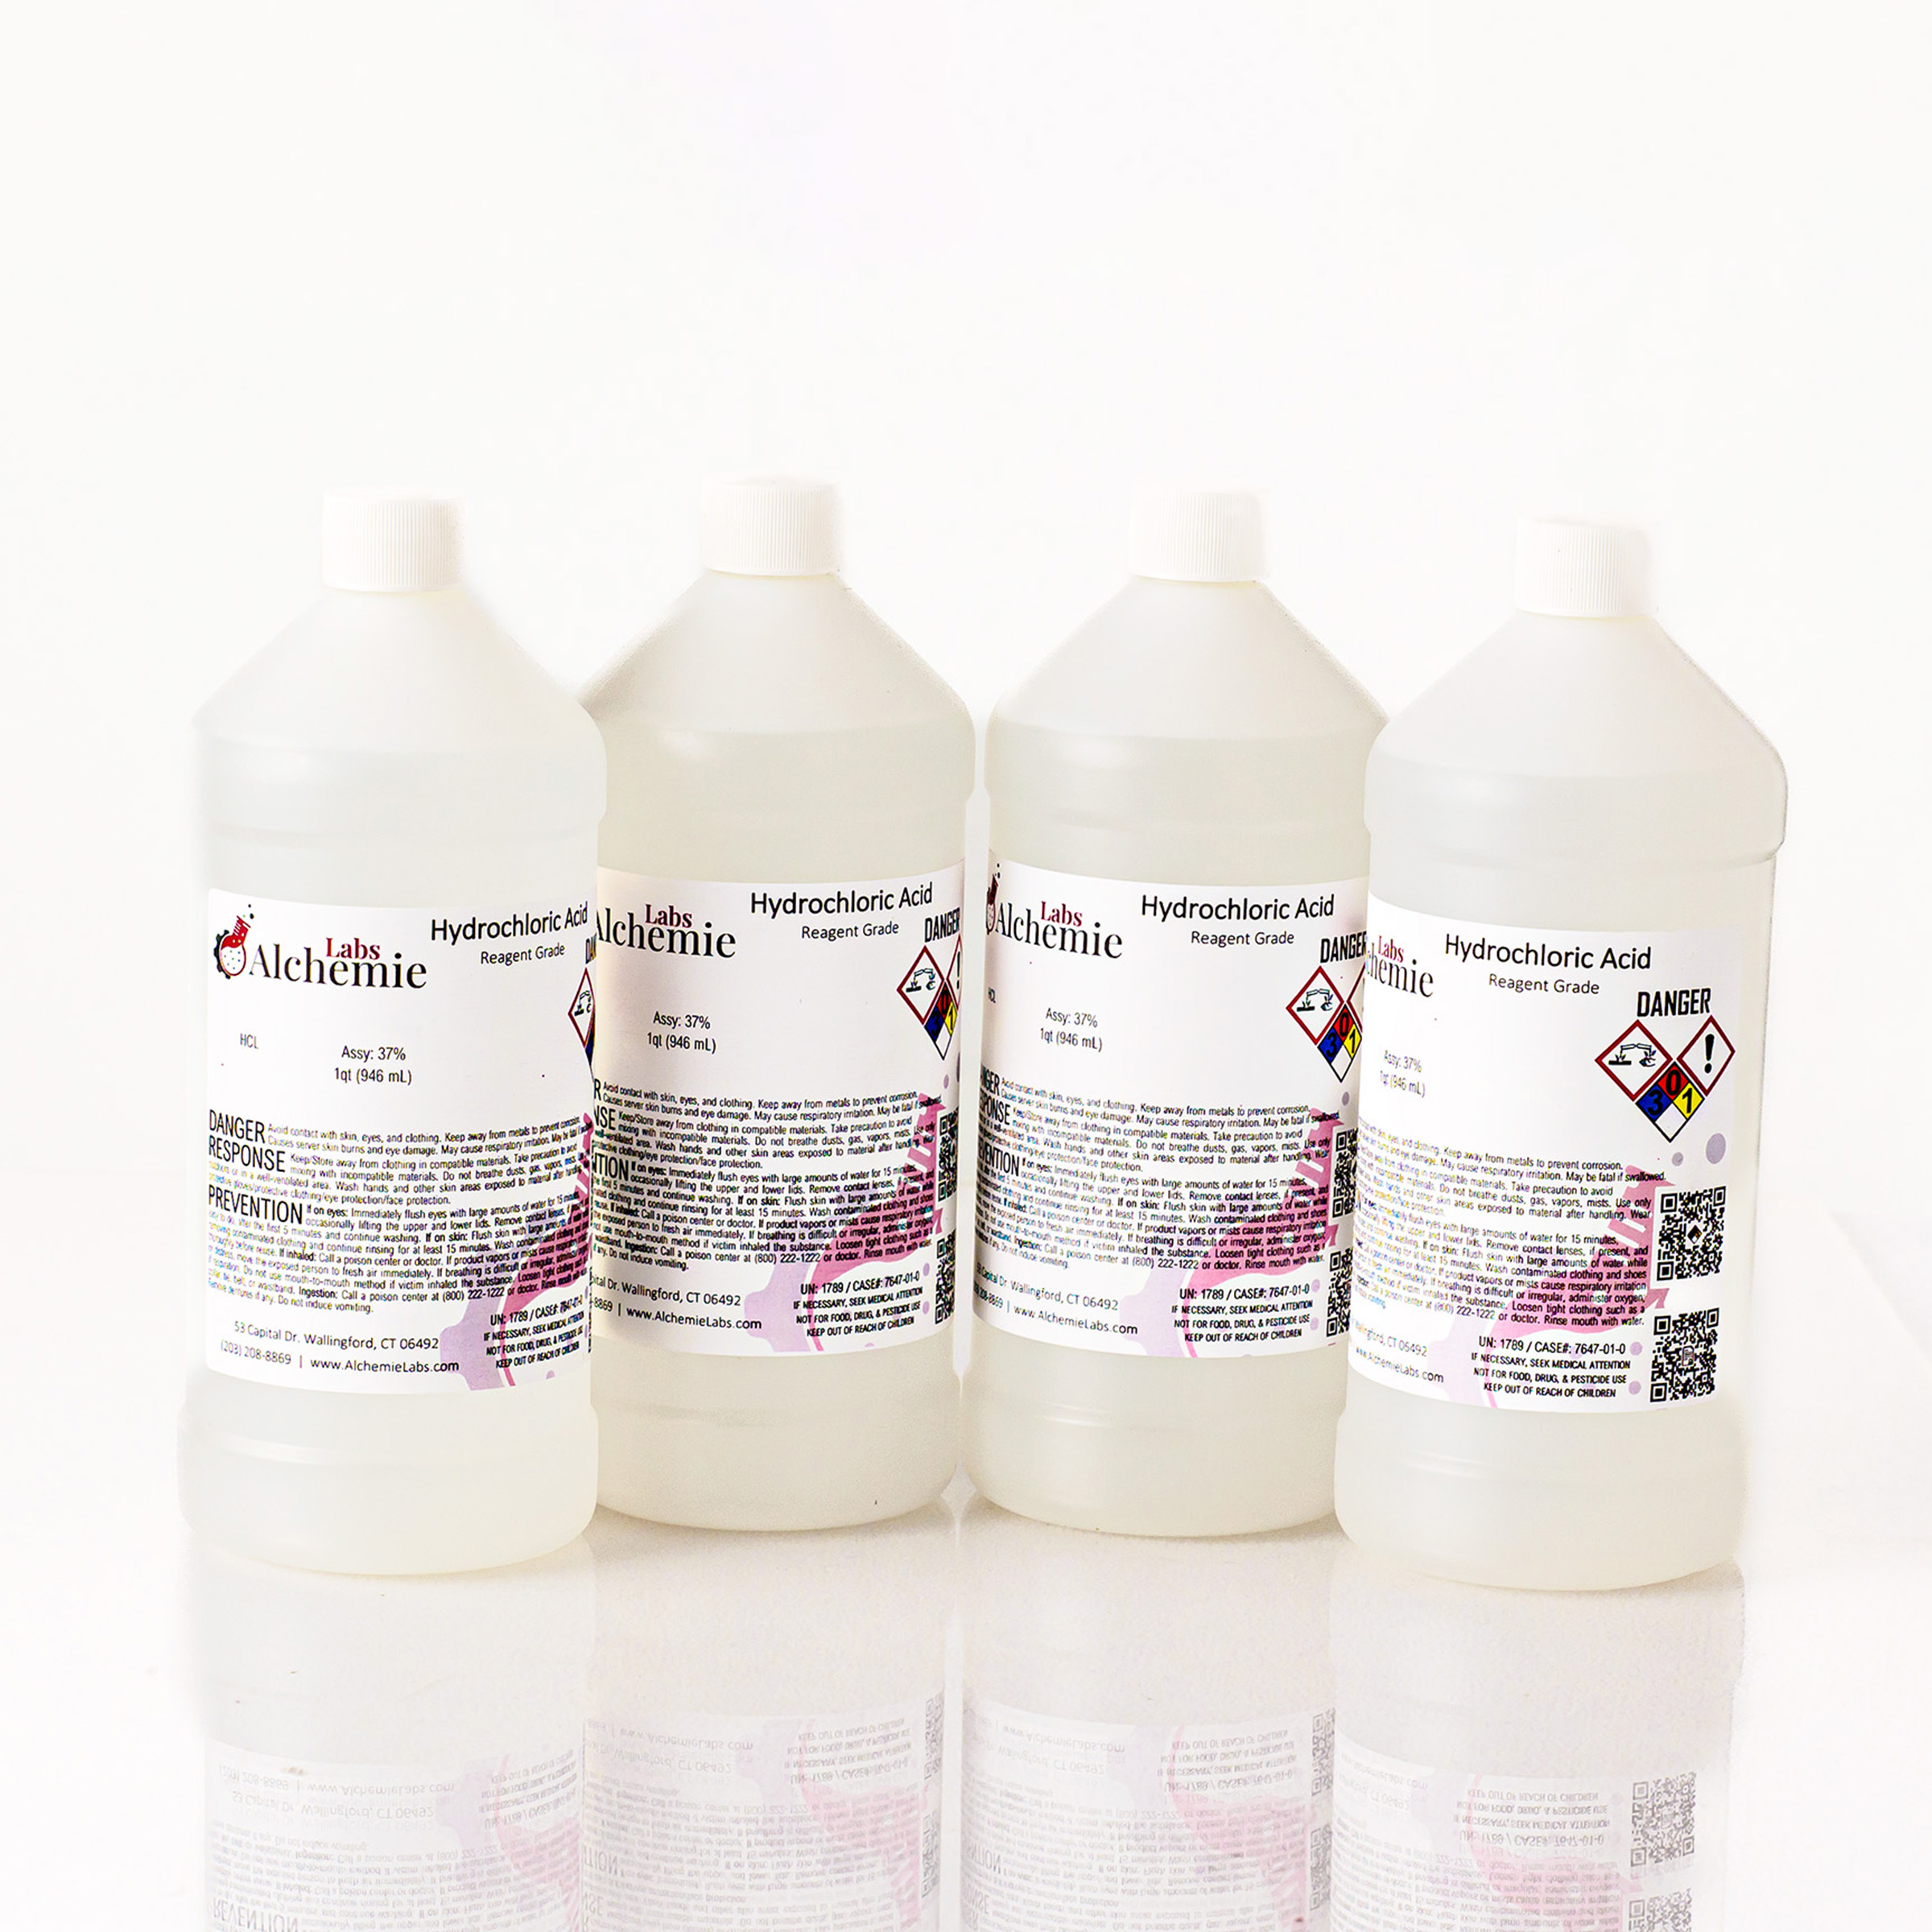 Four 1-quart plastic bottles of Alchemie Labs hydrochloric acid, reagent grade, totaling 1 gallon, with safety labels.